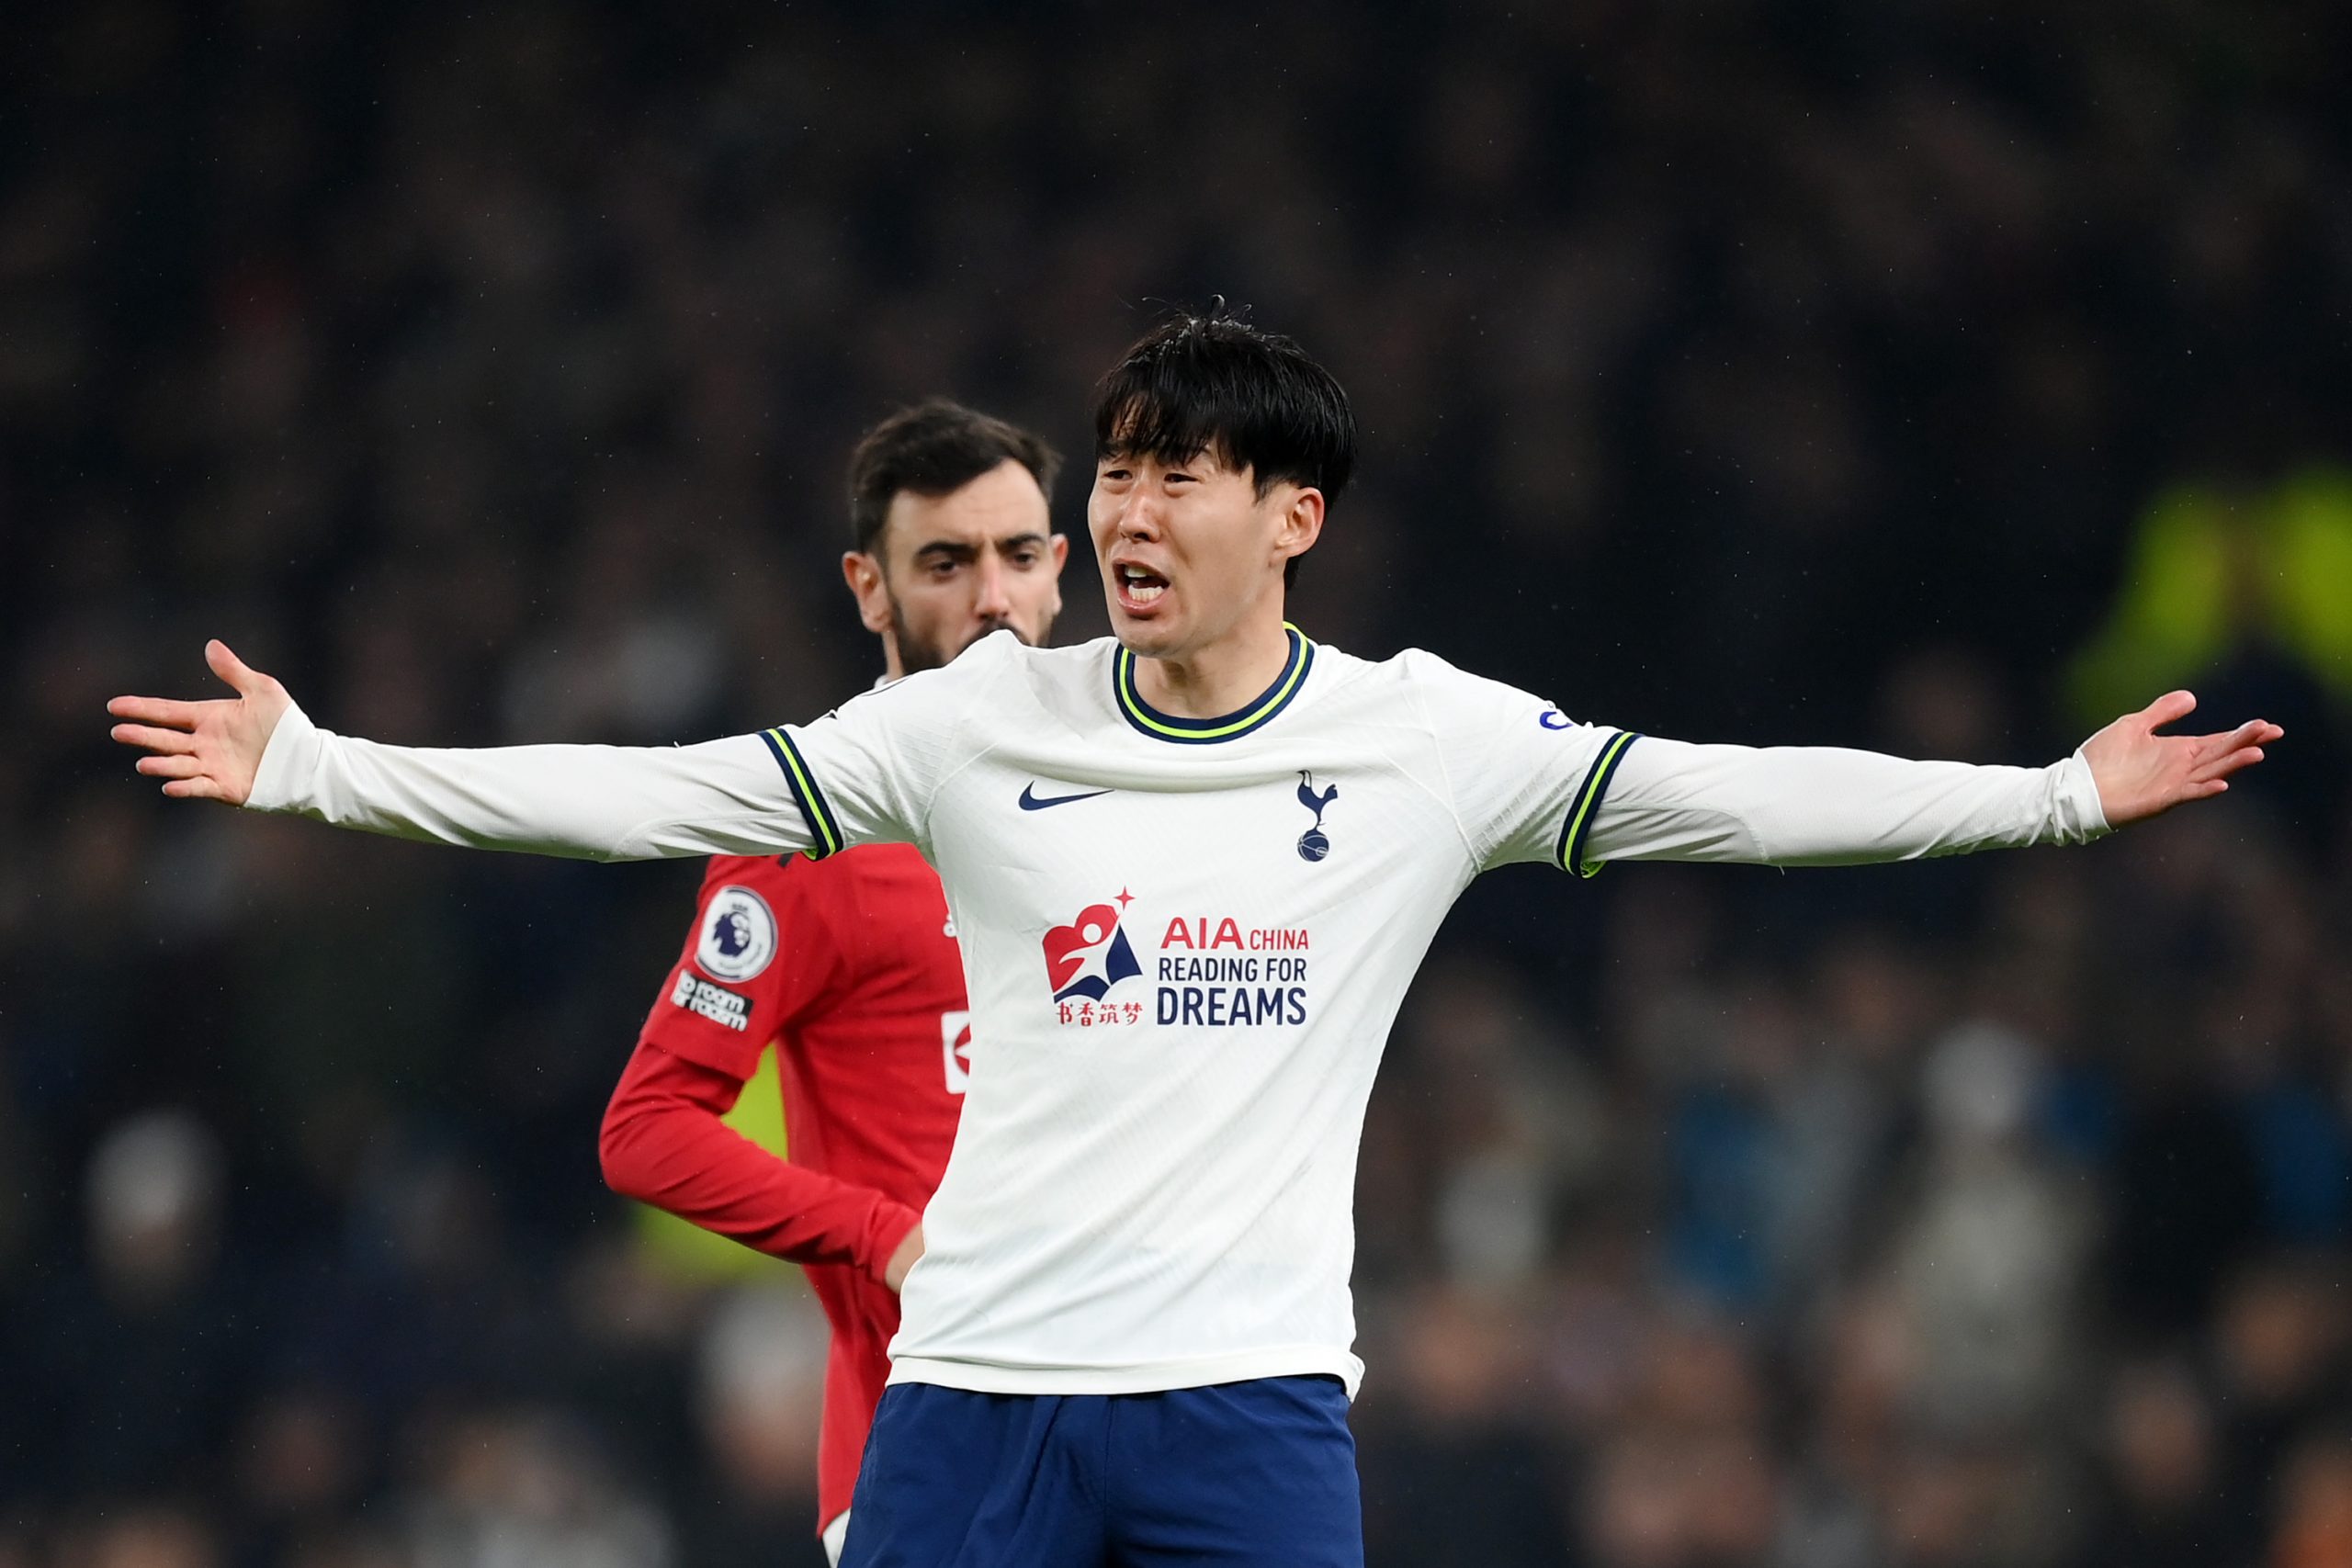 Tottenham Hotspur are expecting €60m bid for Son Heung-min.